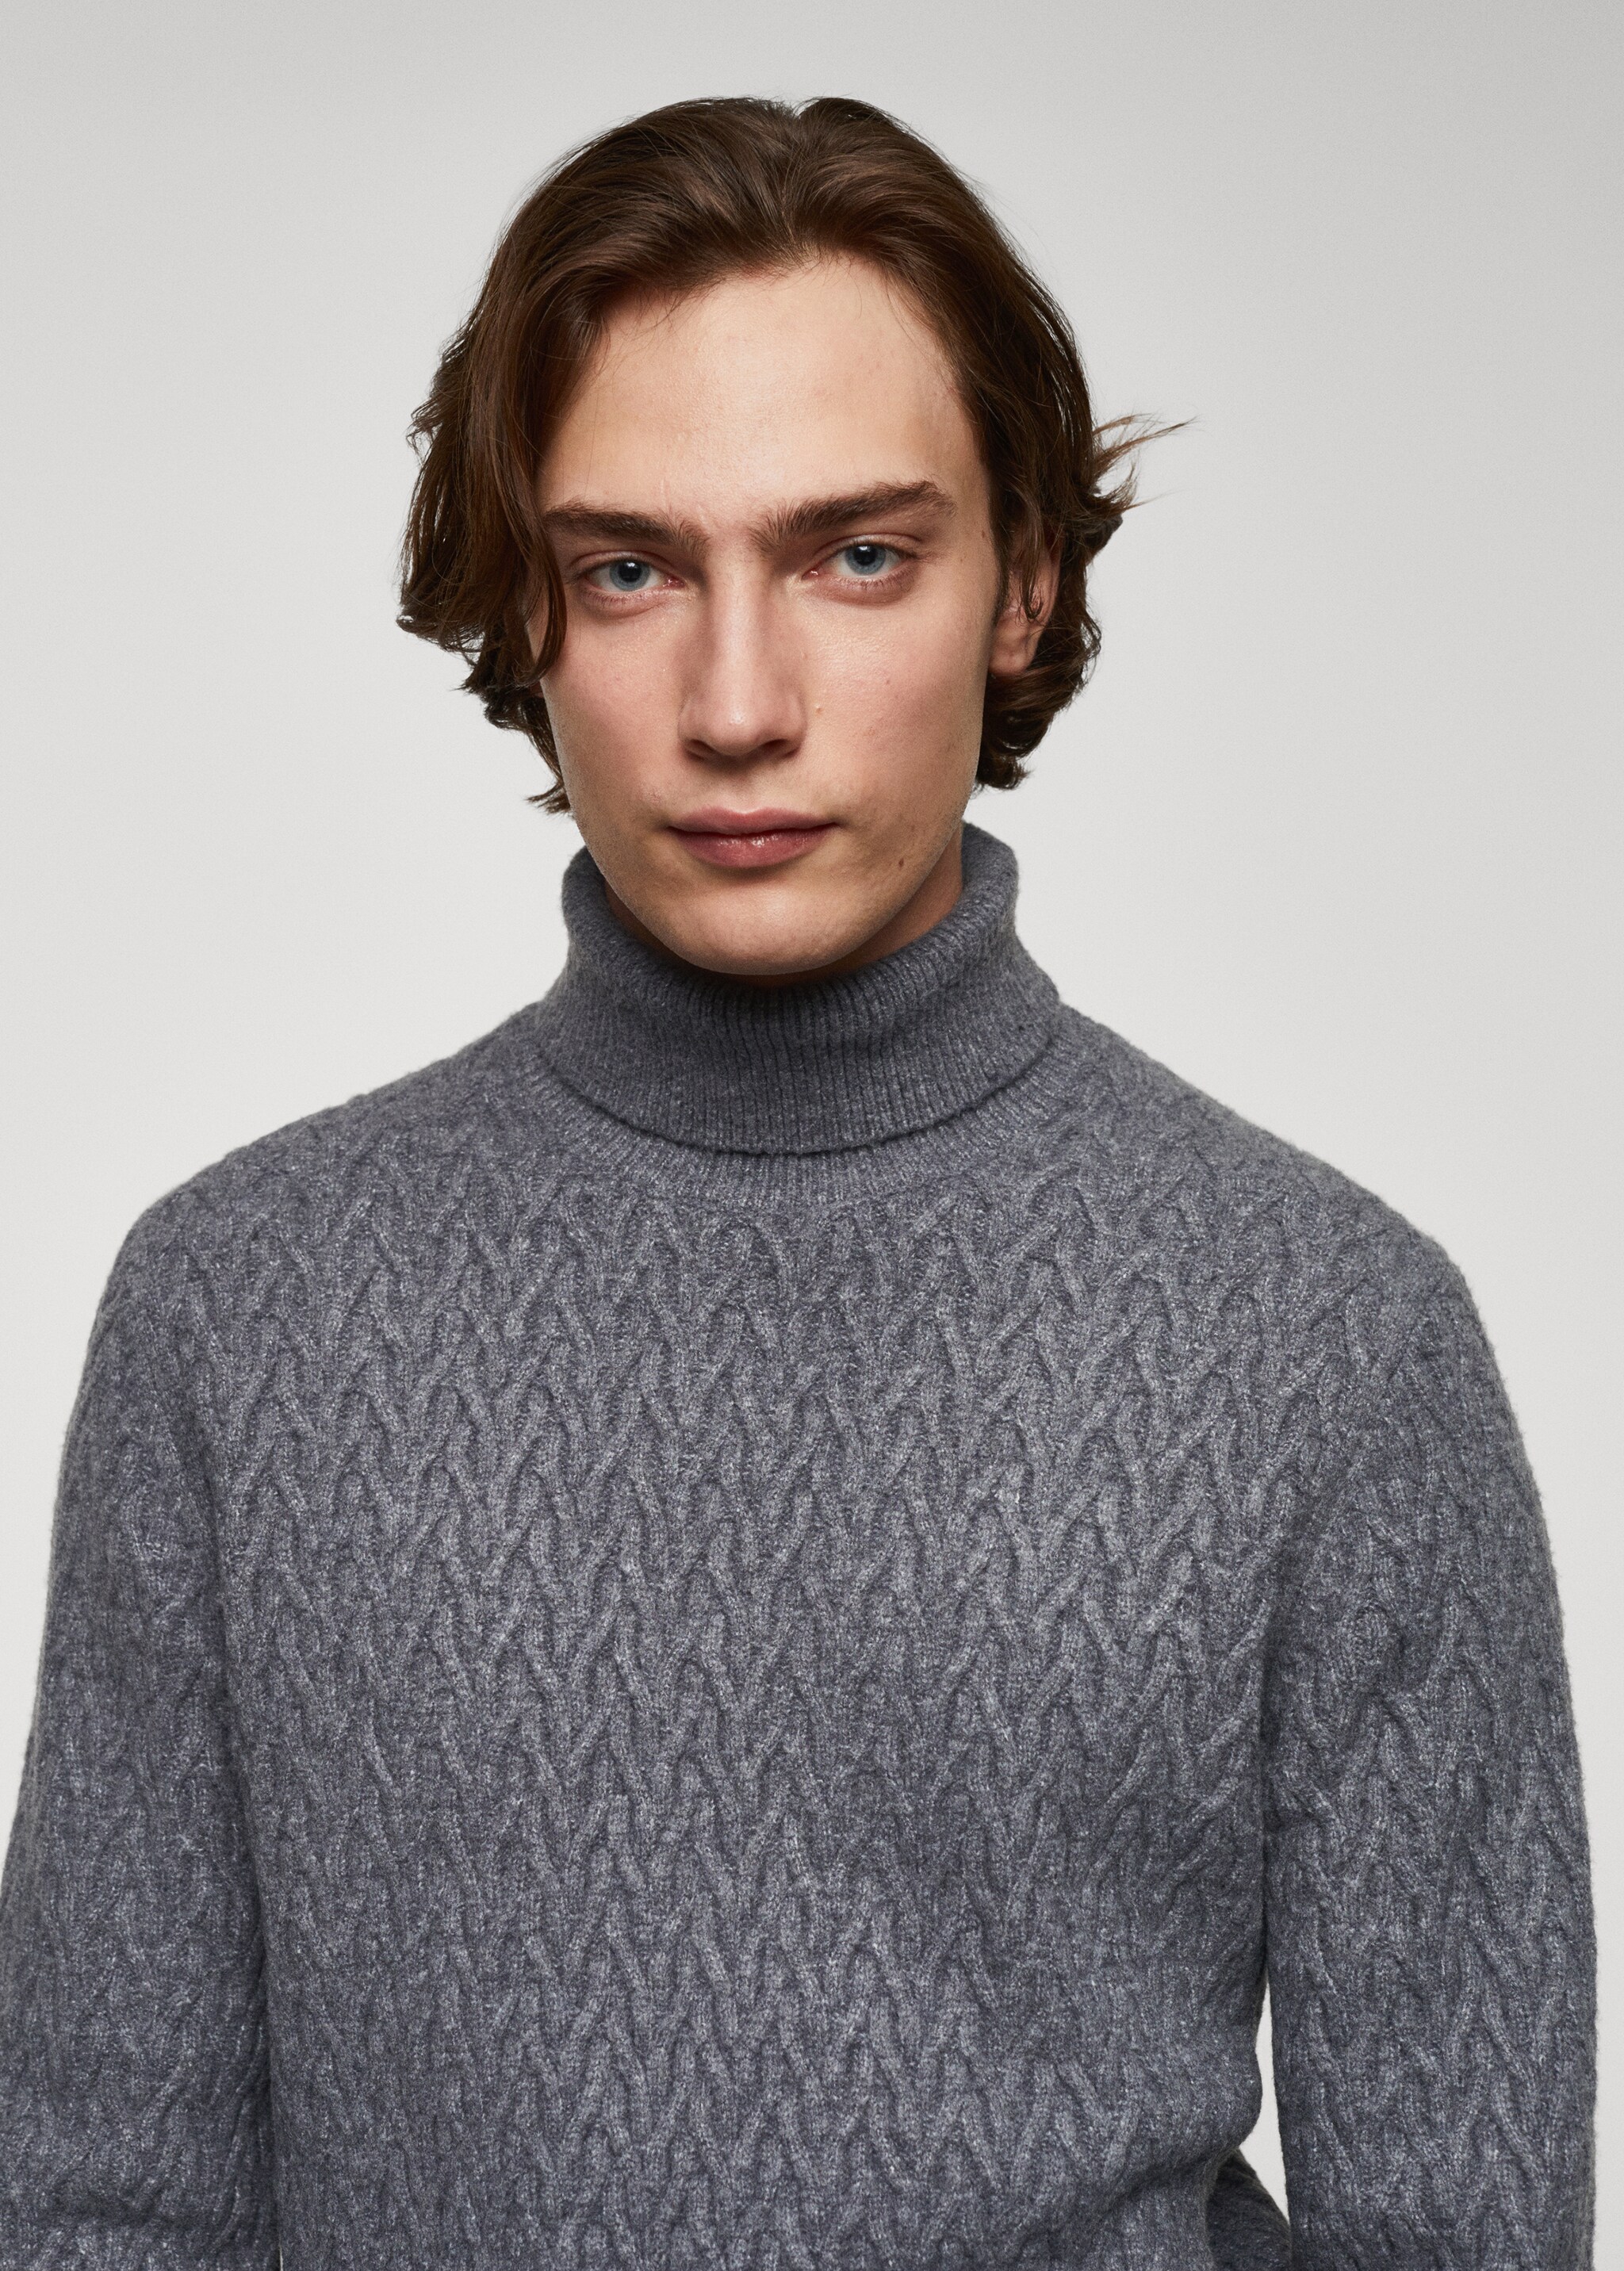 Braided turtleneck sweater - Details of the article 1